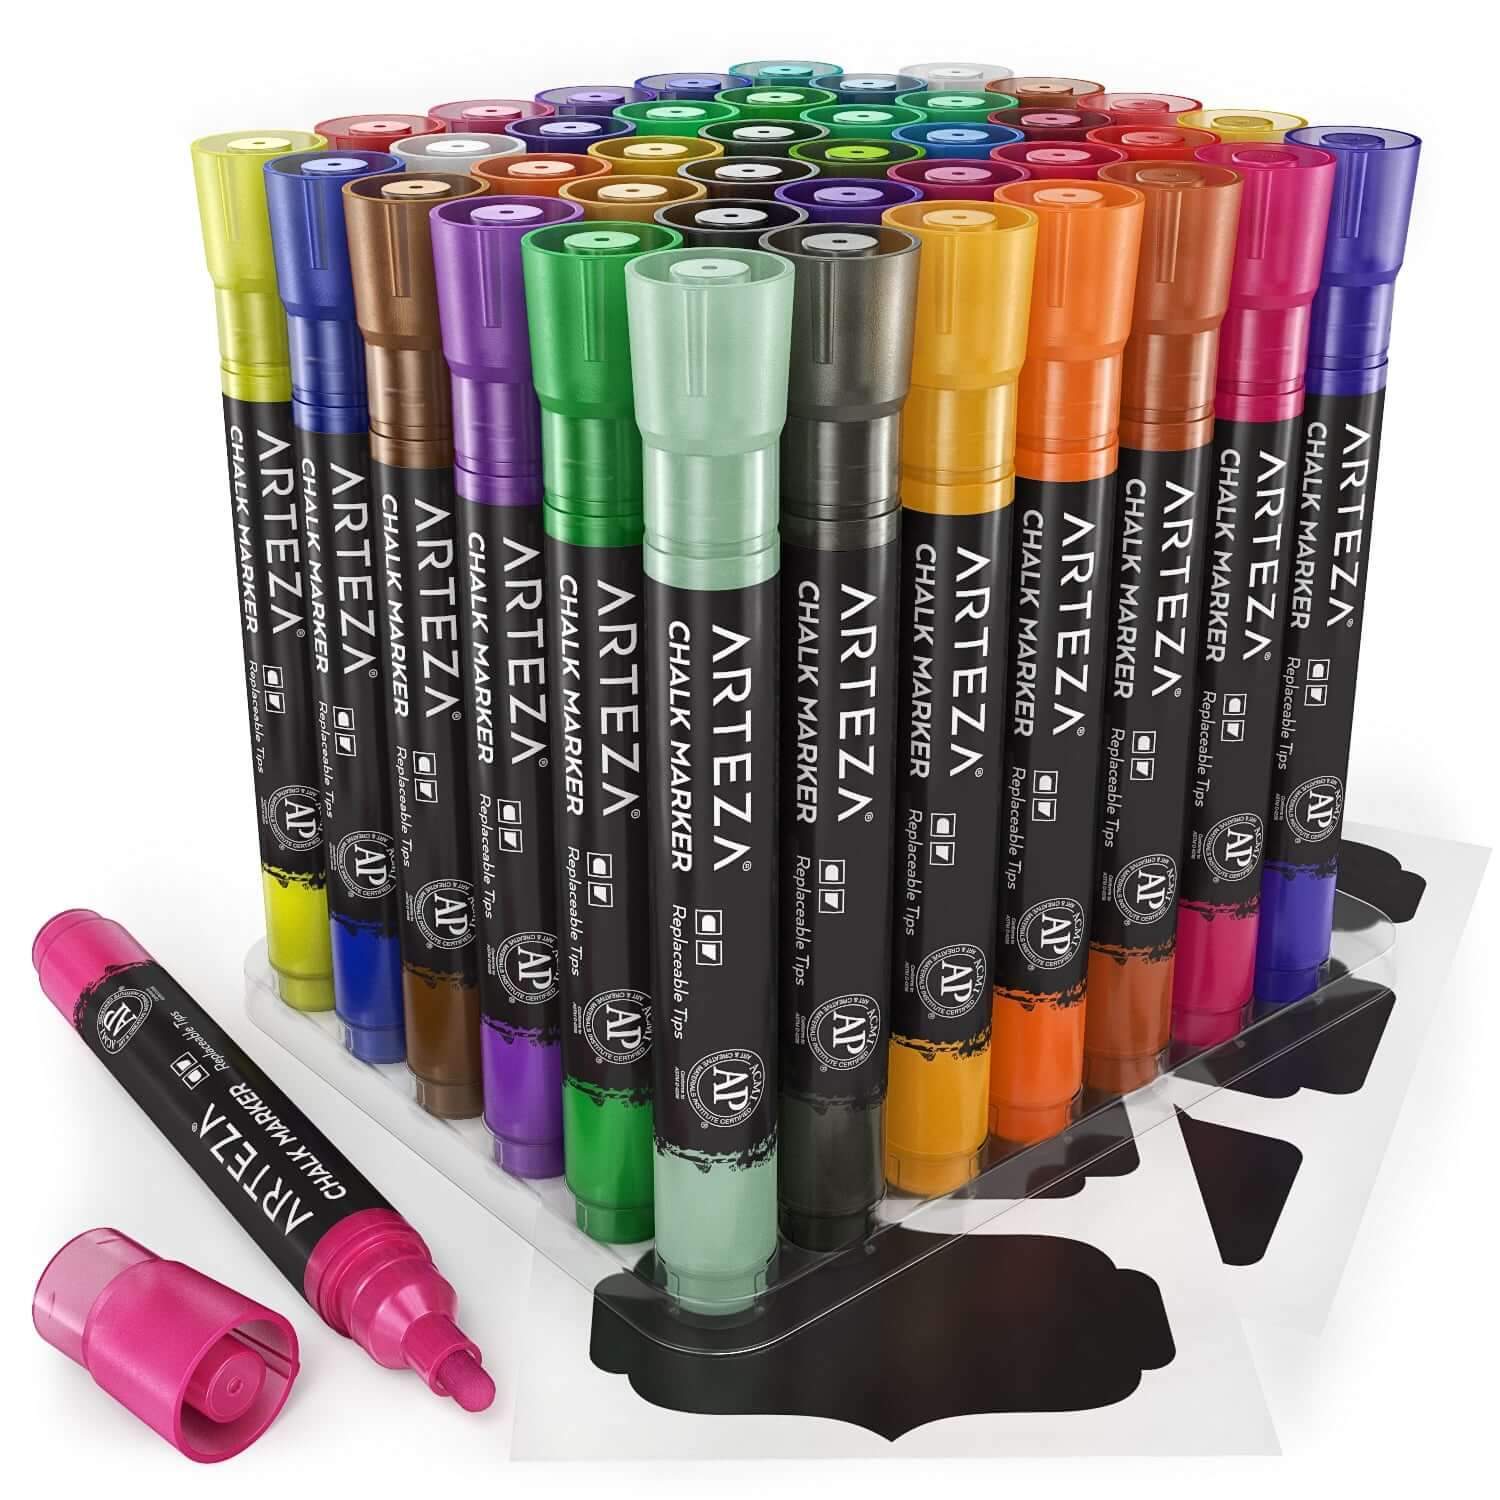 12 Life of Colour Liquid Chalk Markers - 10% OFF